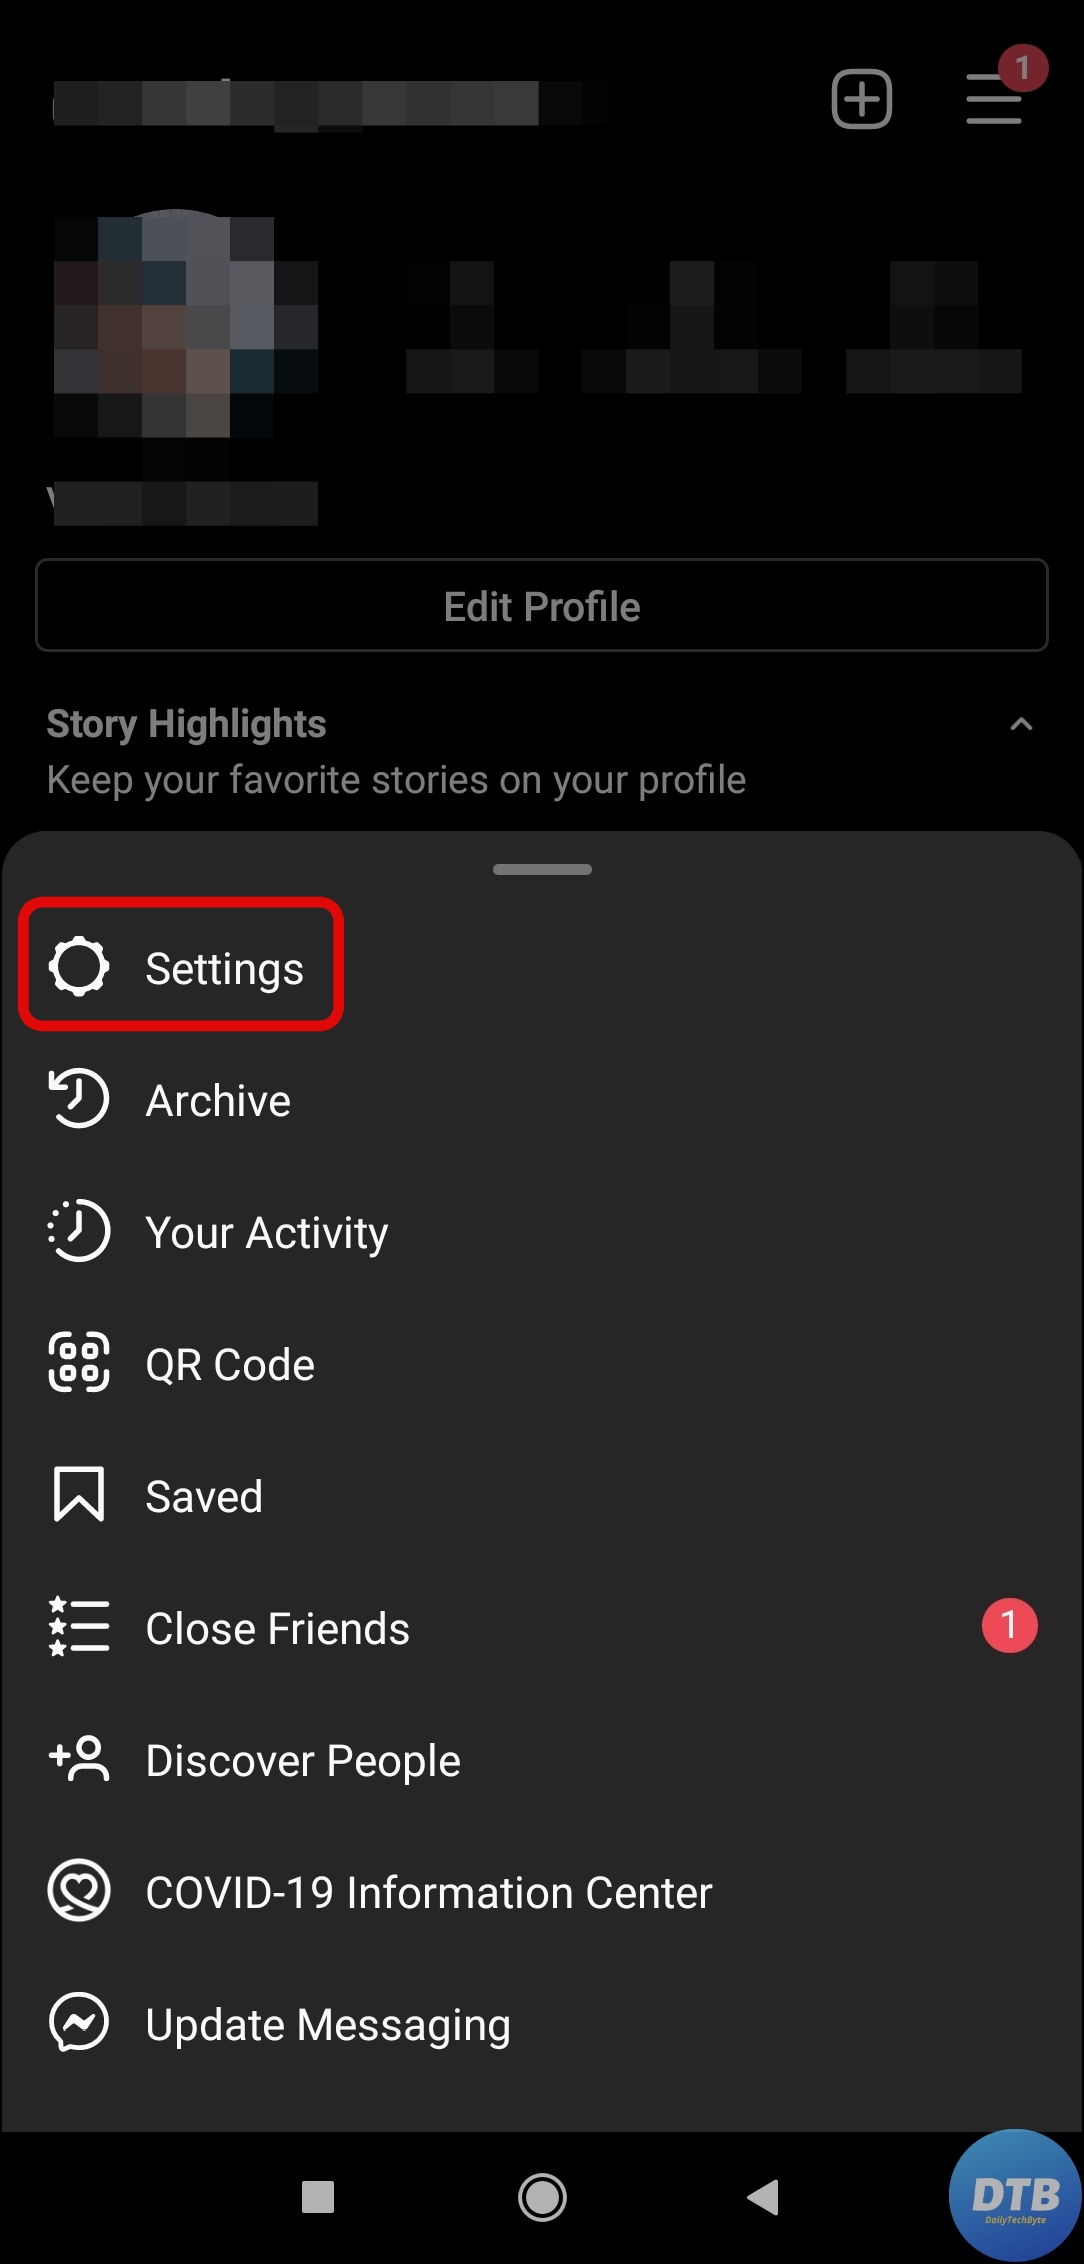 Contact Instagram Support to Fix External Links Not Adding or Working on Instagram